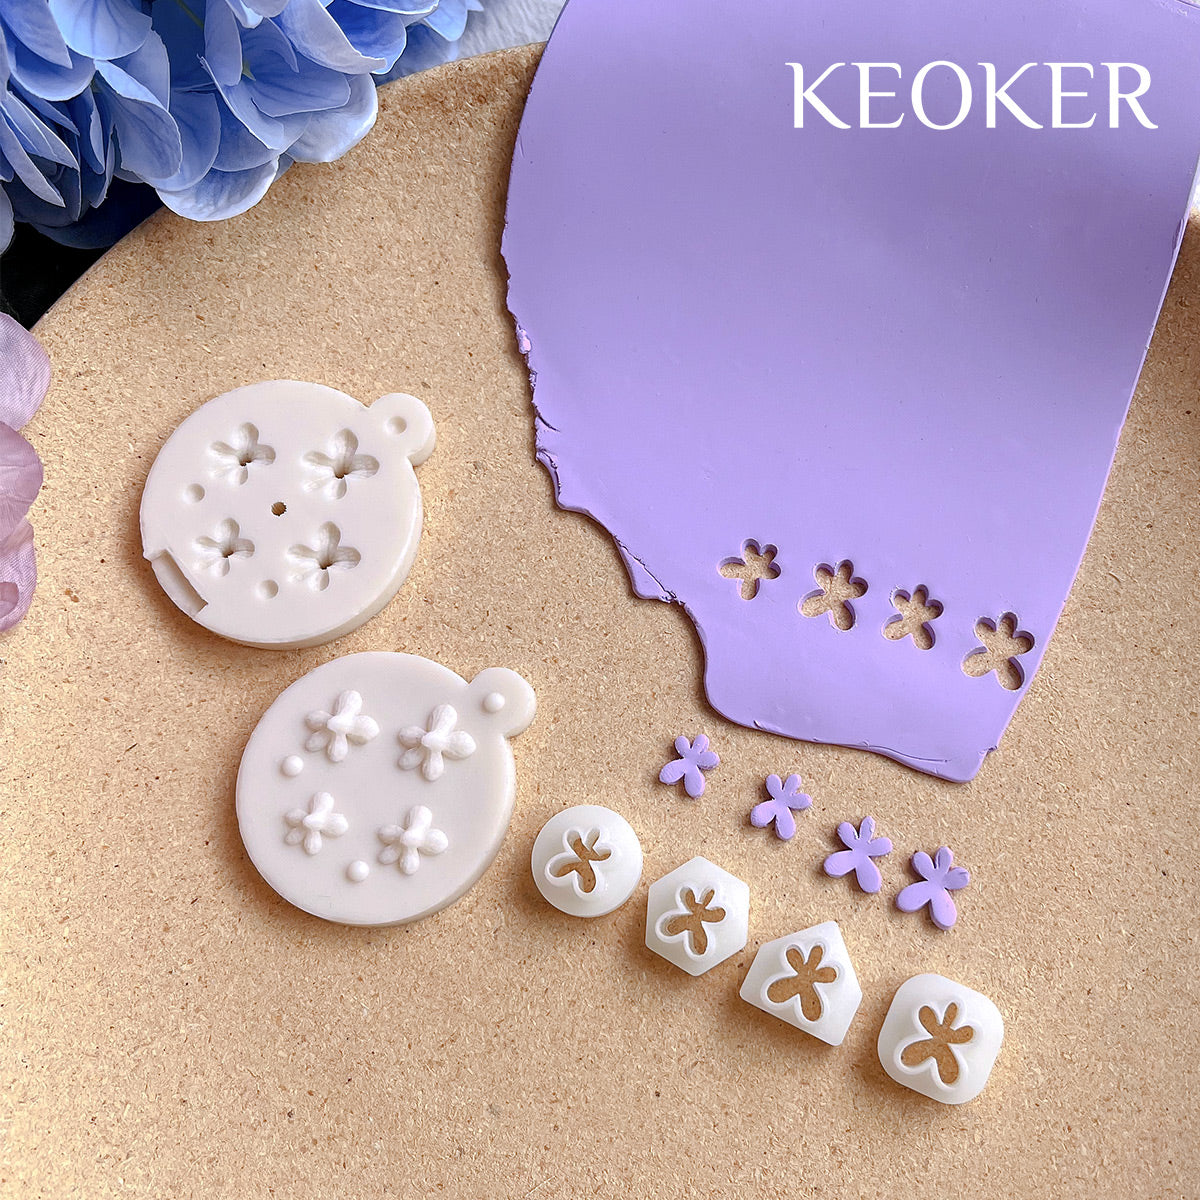 Keoker Bell Orchid Polymer Clay Earrings Molds